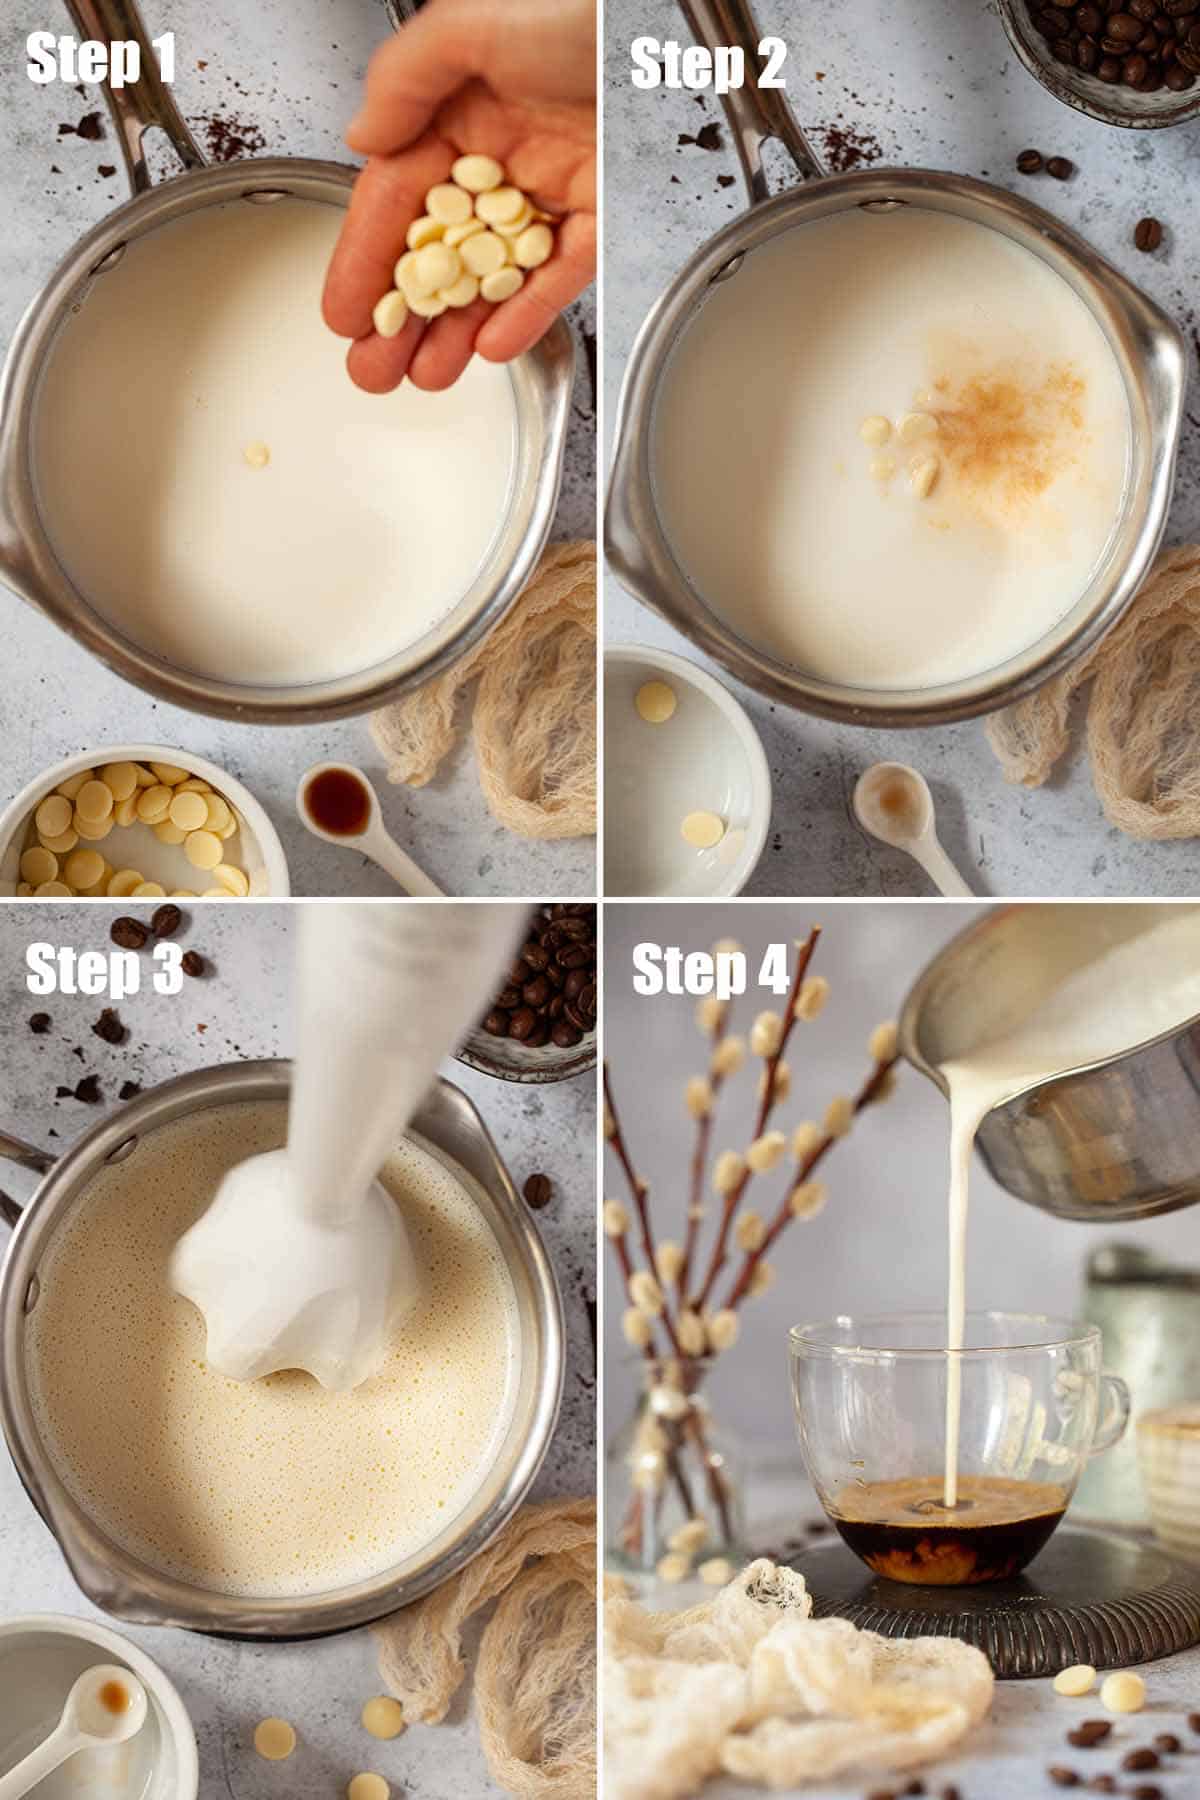 Collage of images showing a sweet coffee drink being made.